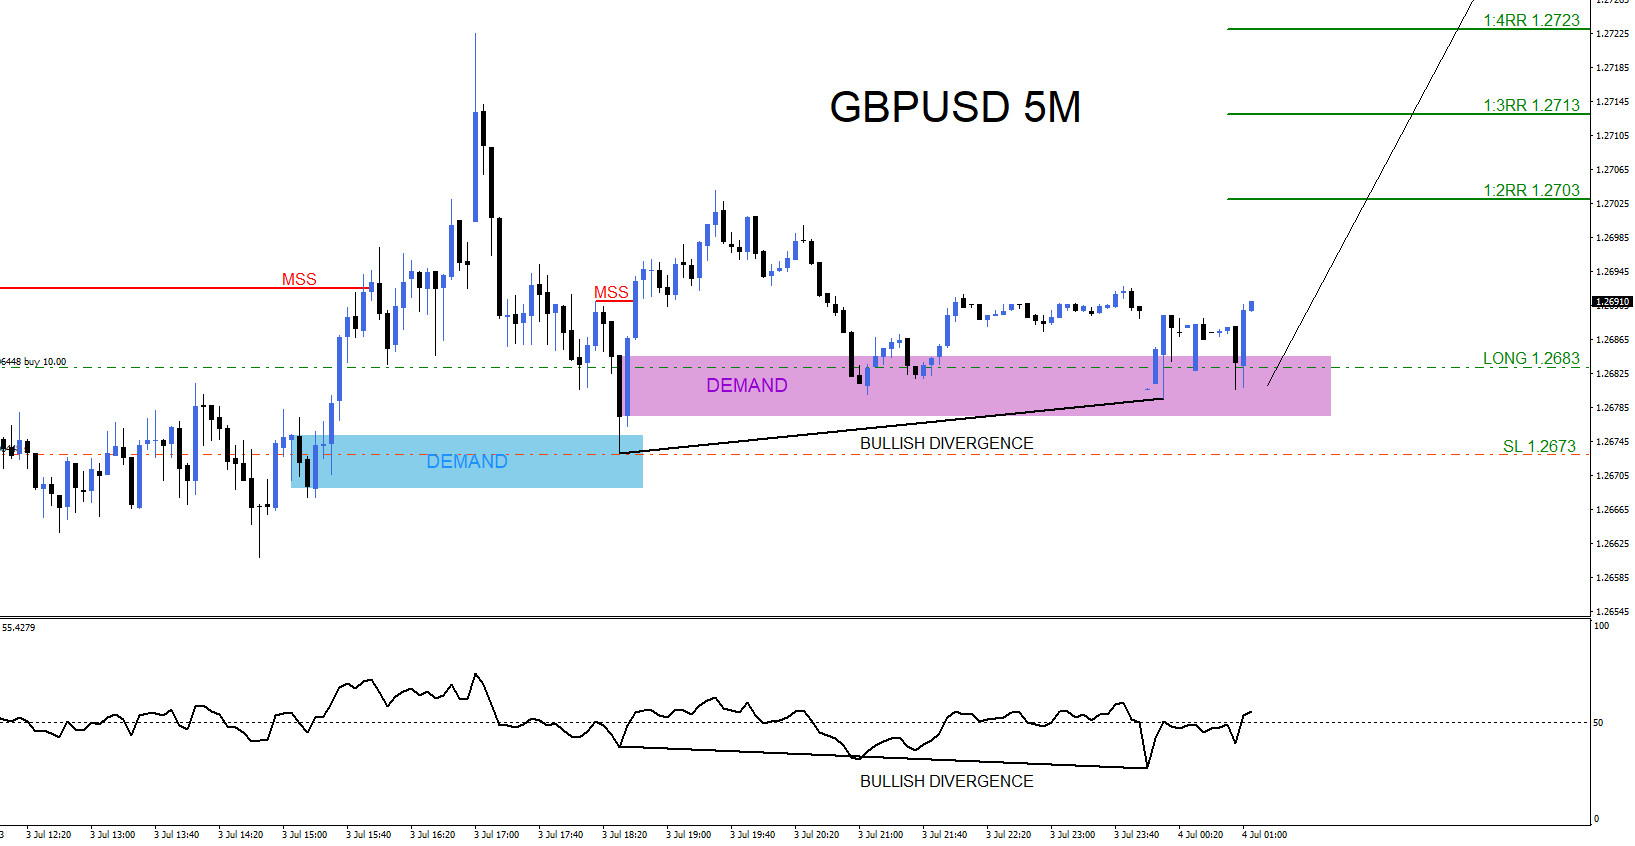 GBPUSD : Catching the Move Higher